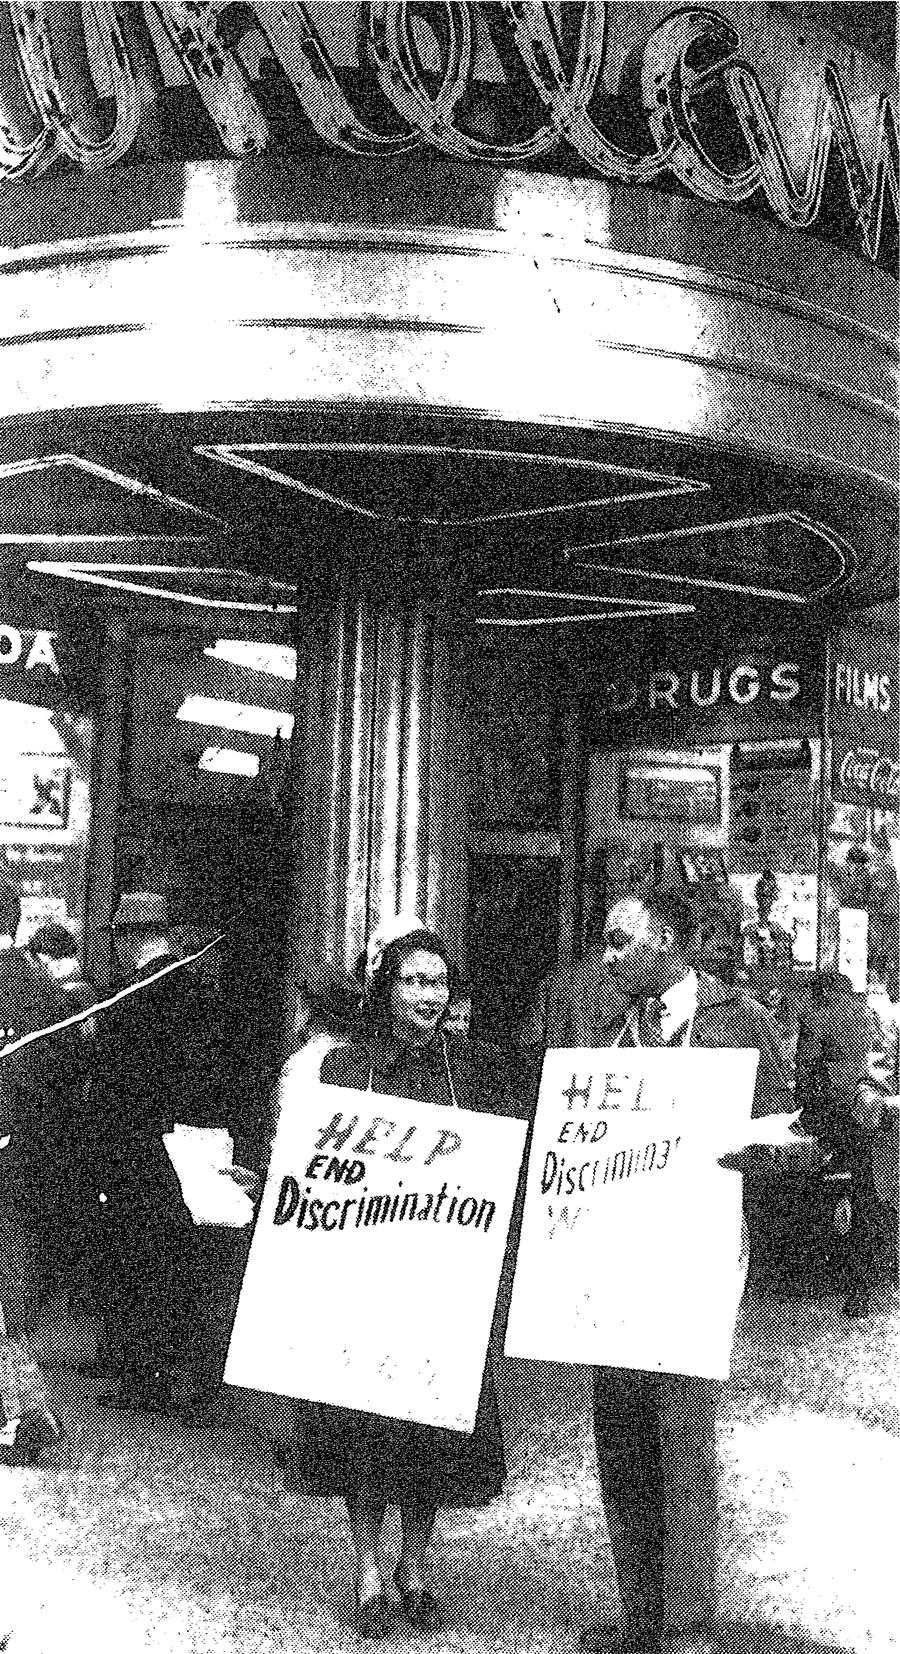 Ina Sugihara and Charles Crawford protest for civil rights